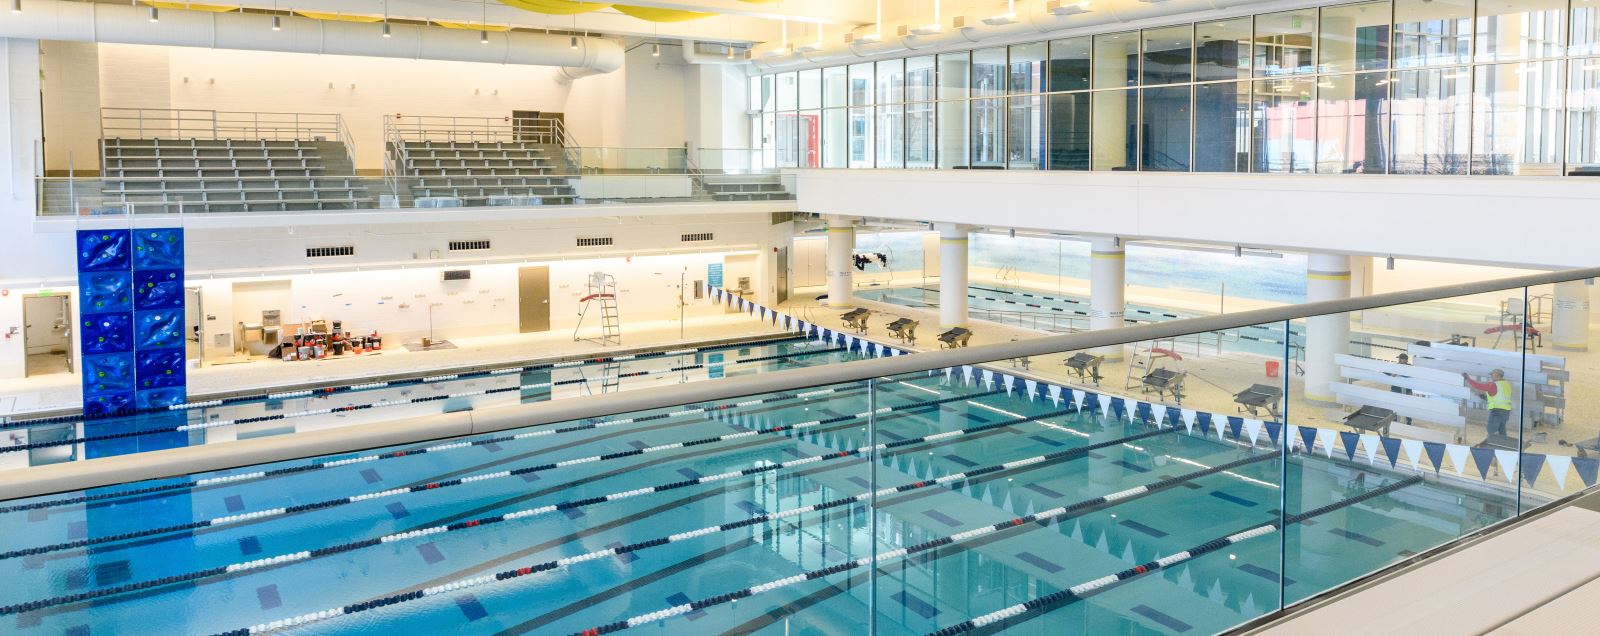 Silver Spring Recreation & Aquatic Center- Diving Well and Pool